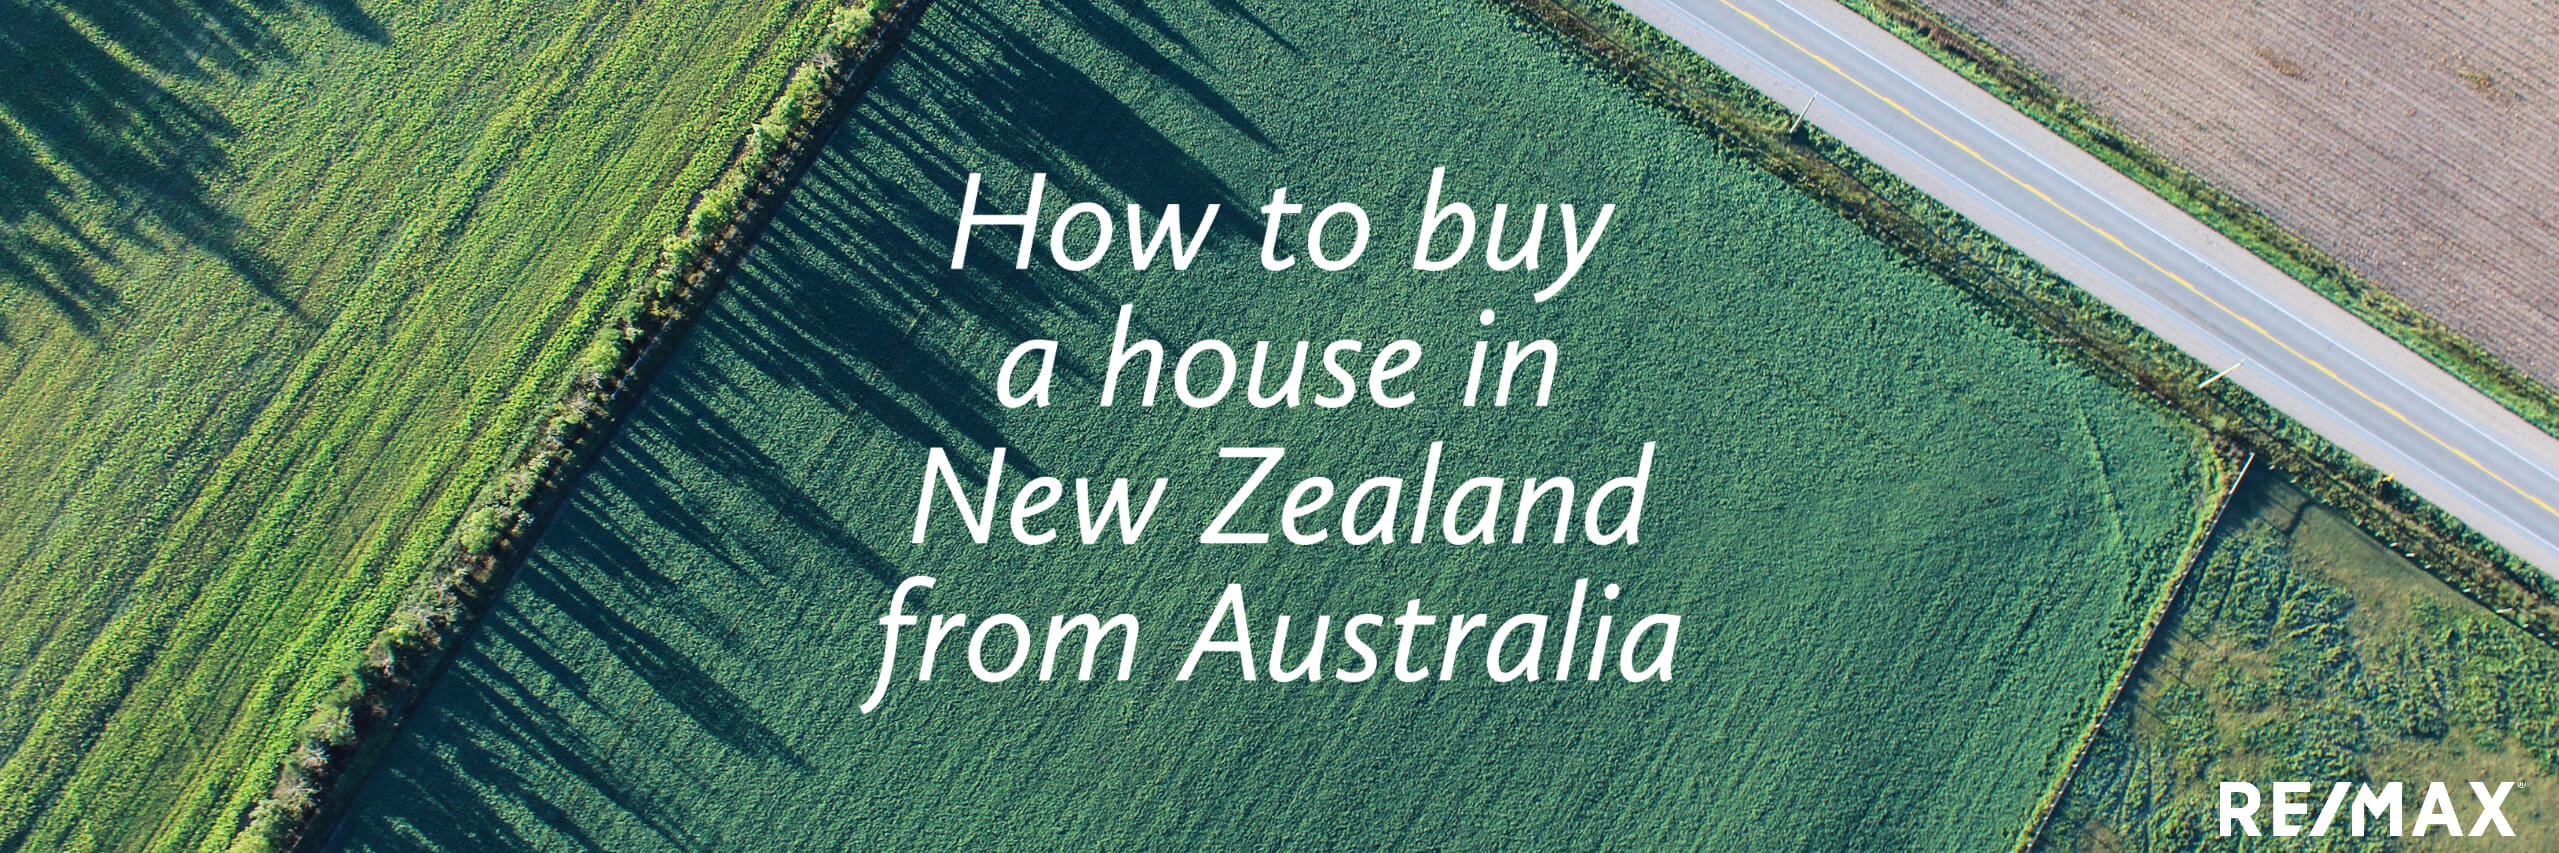 How to buy a house in NZ